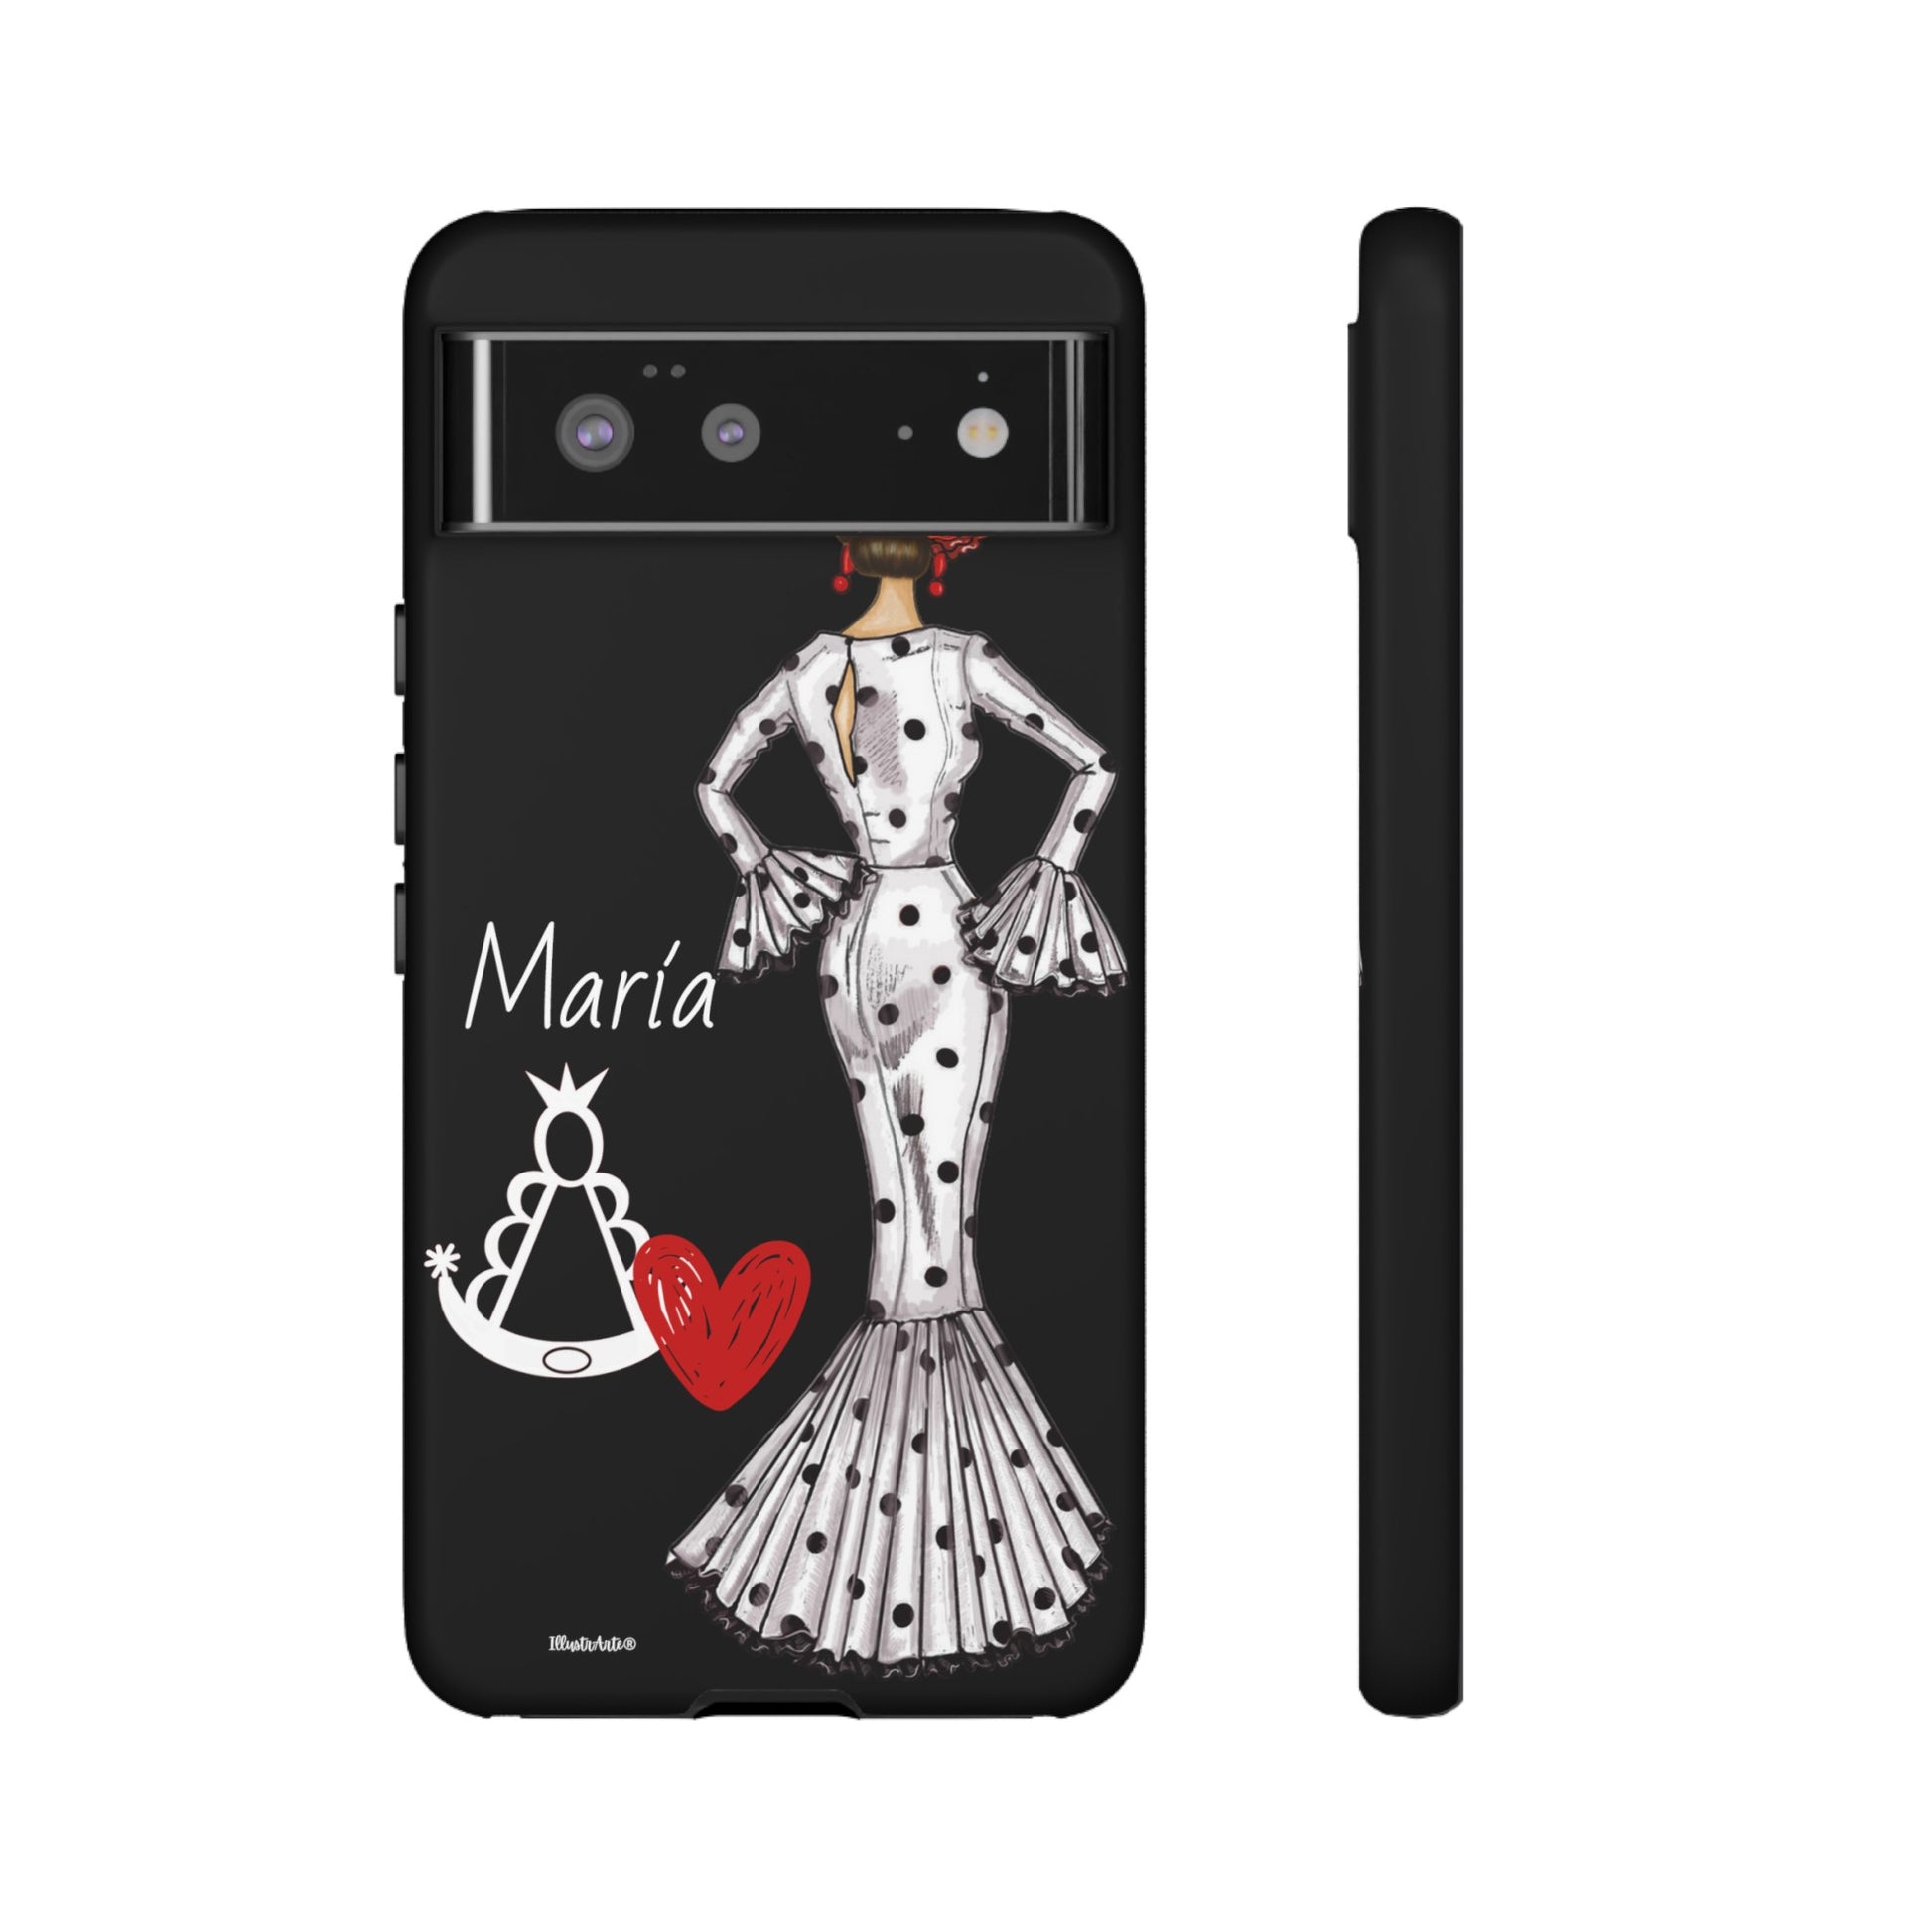 a phone case with a woman in a dress and a heart